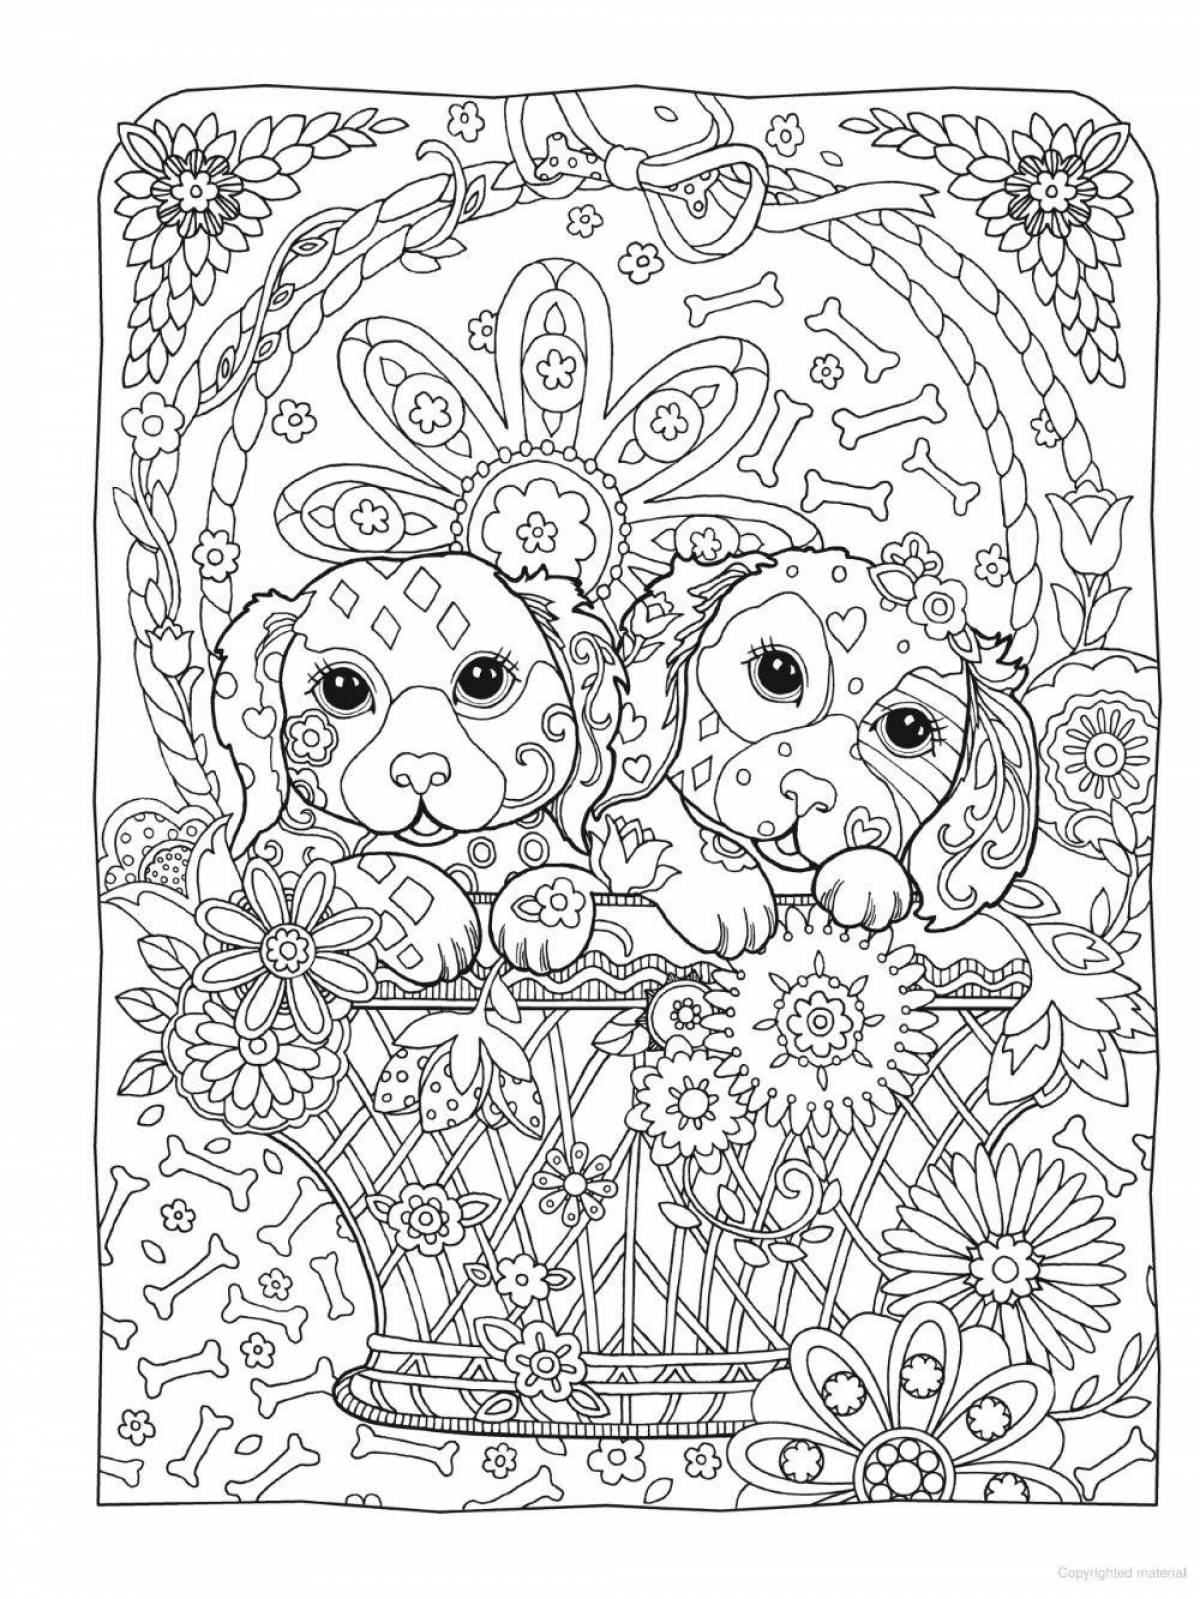 Fascinating anti-stress coloring book for girls 8 years old